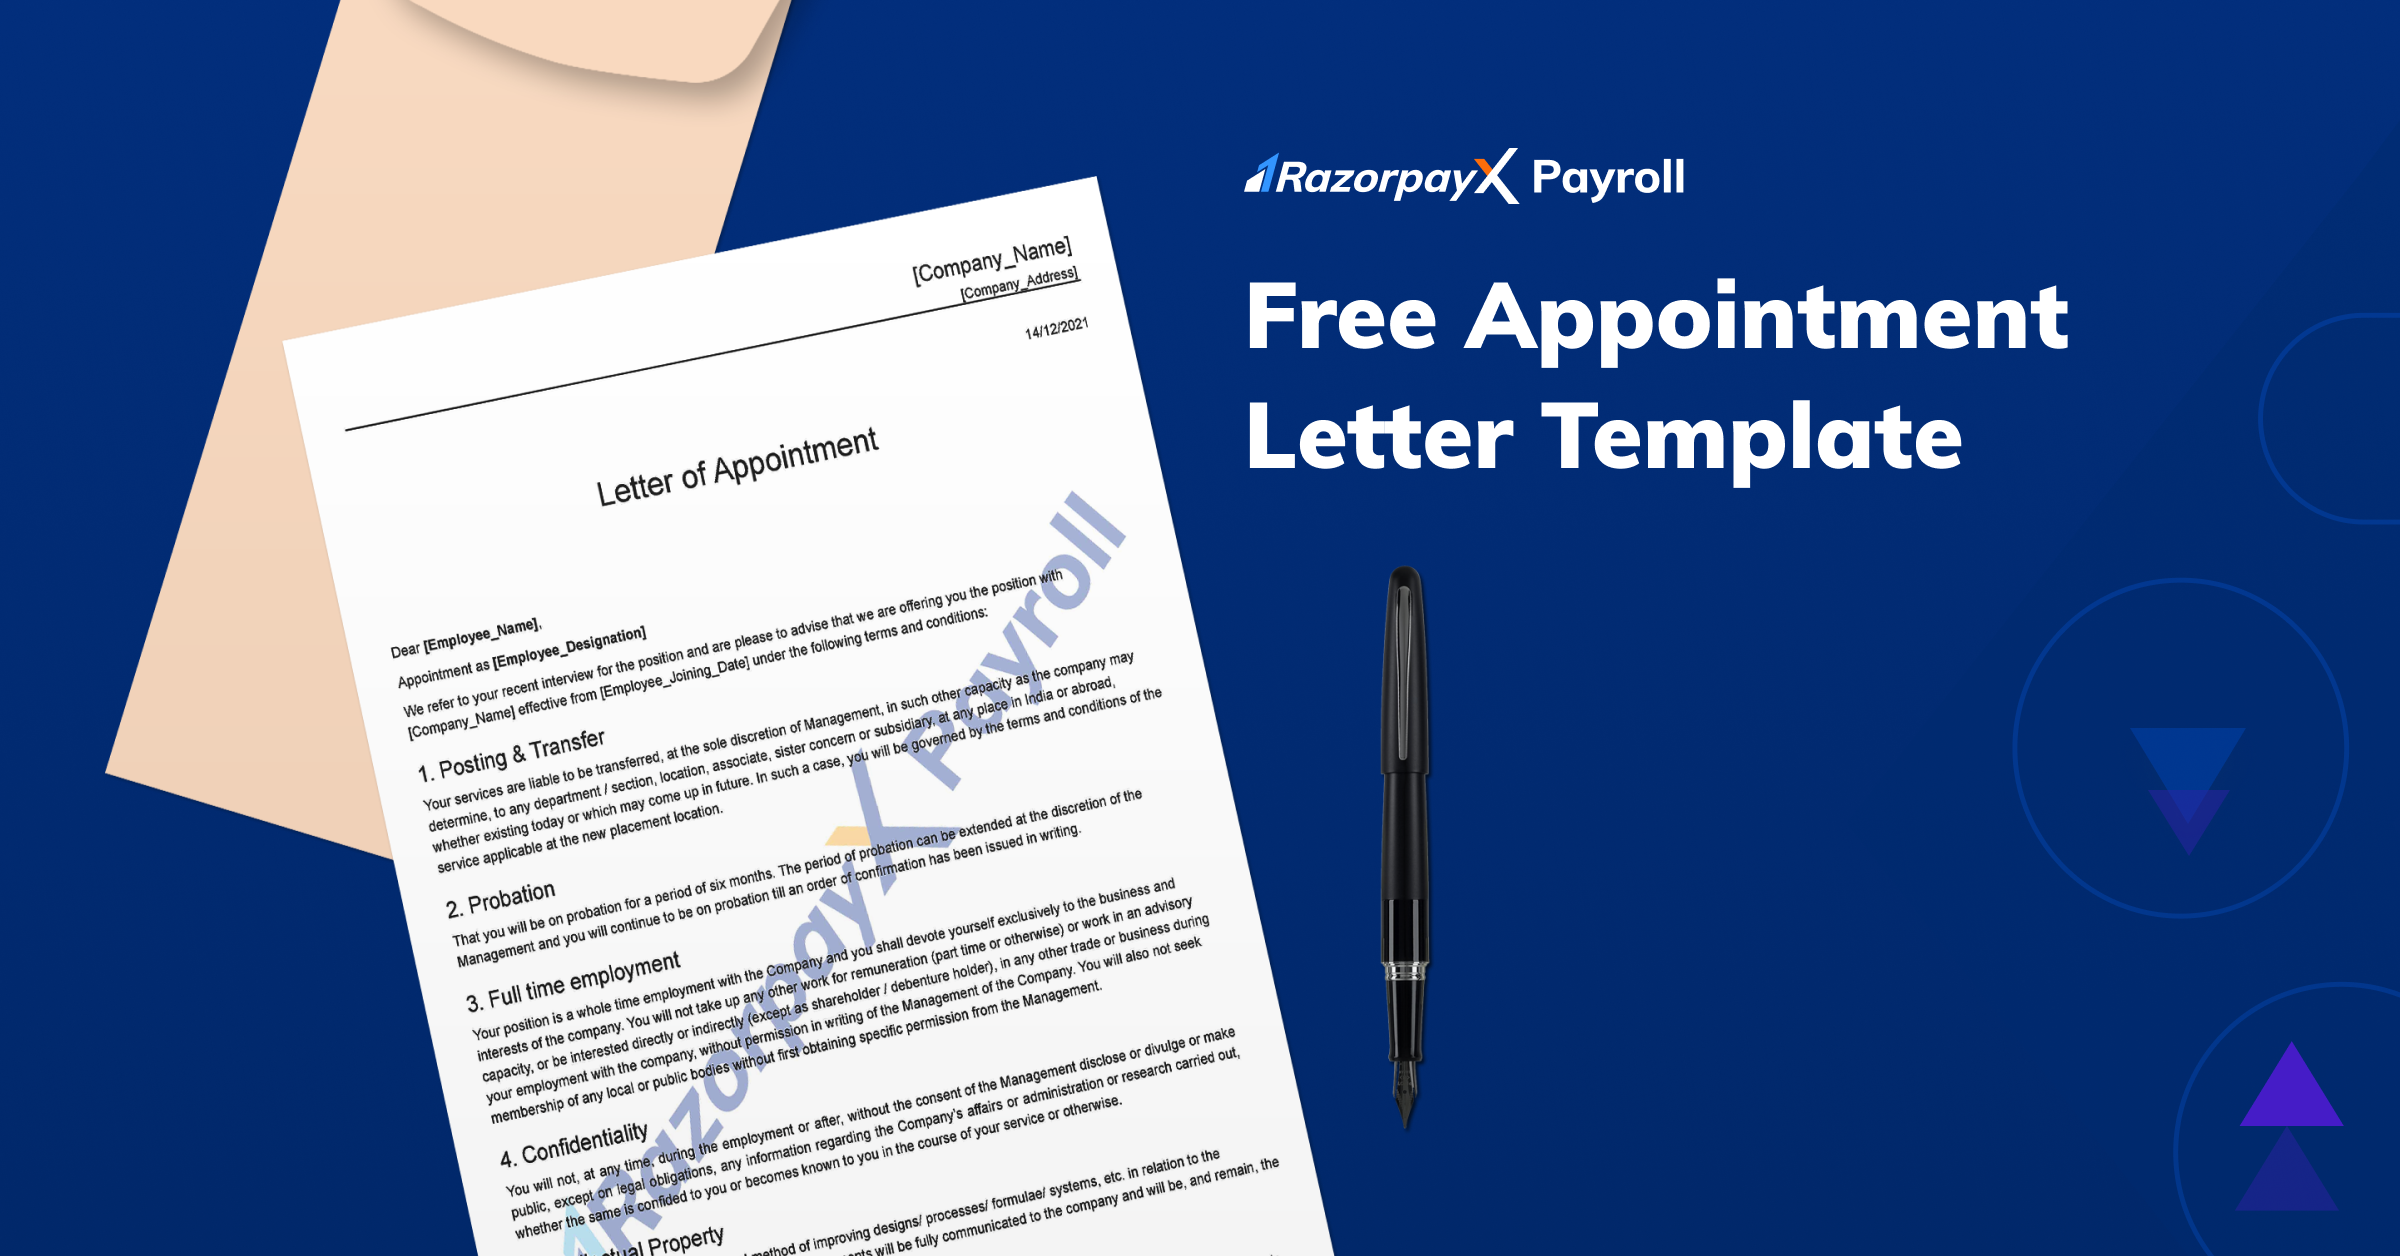 6 Appointment Letter Formats, Sample, Free Templates Razorpay Payroll